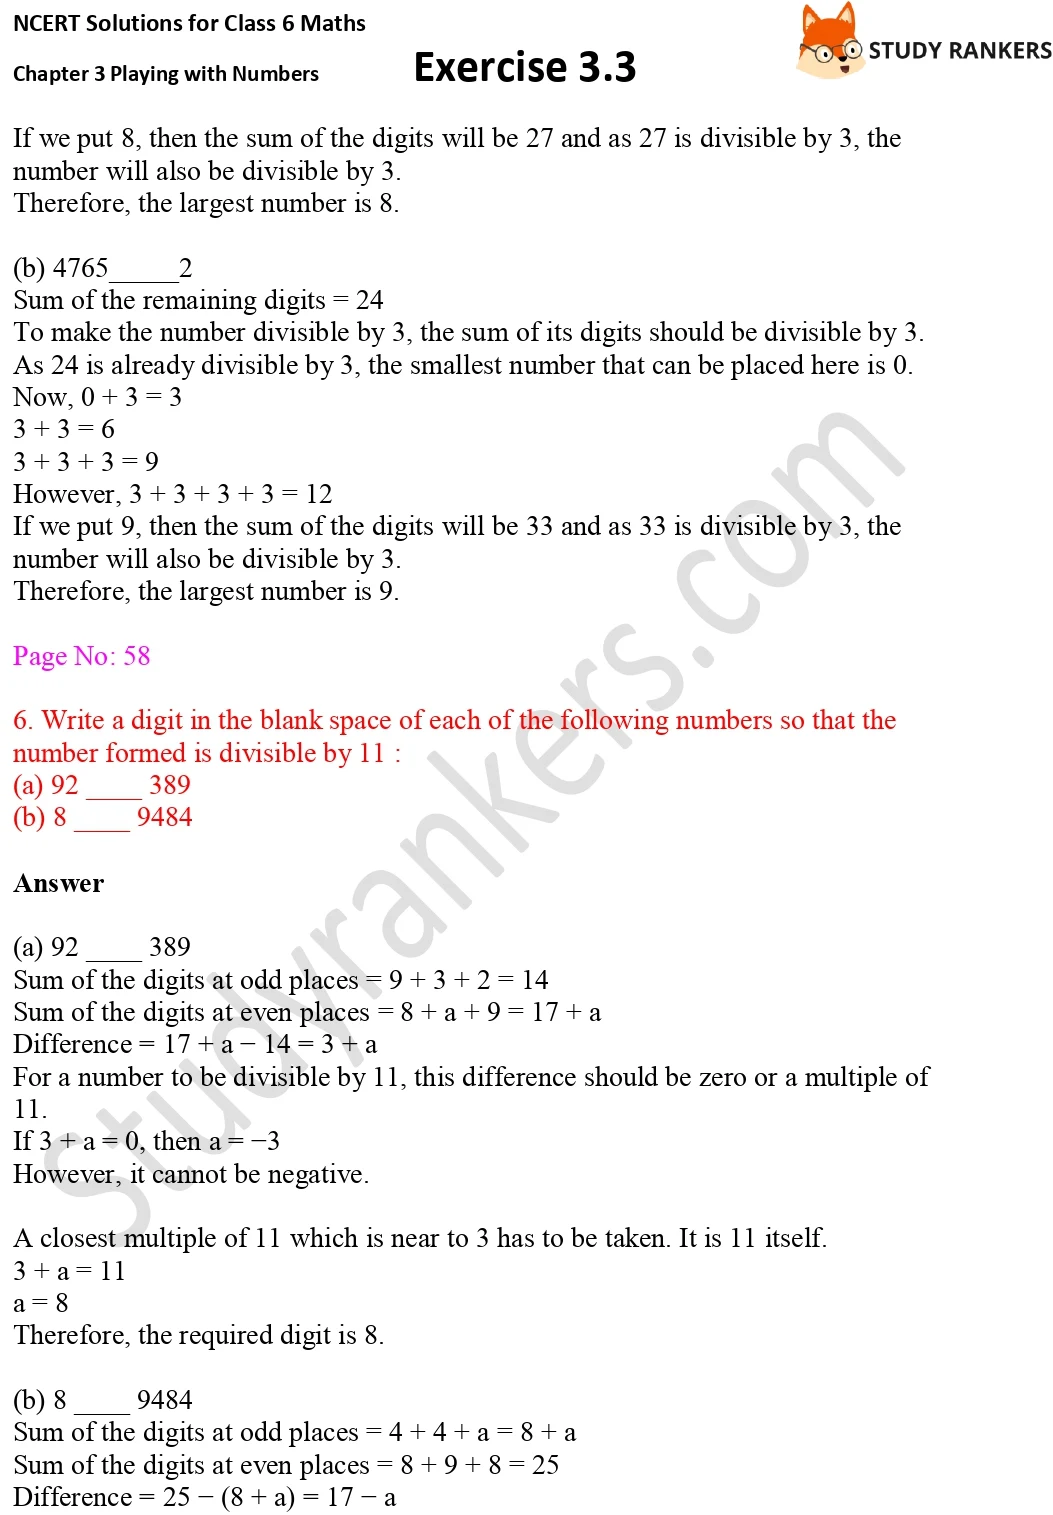 NCERT Solutions for Class 6 Maths Chapter 3 Playing with Numbers Exercise 3.3 Part 6